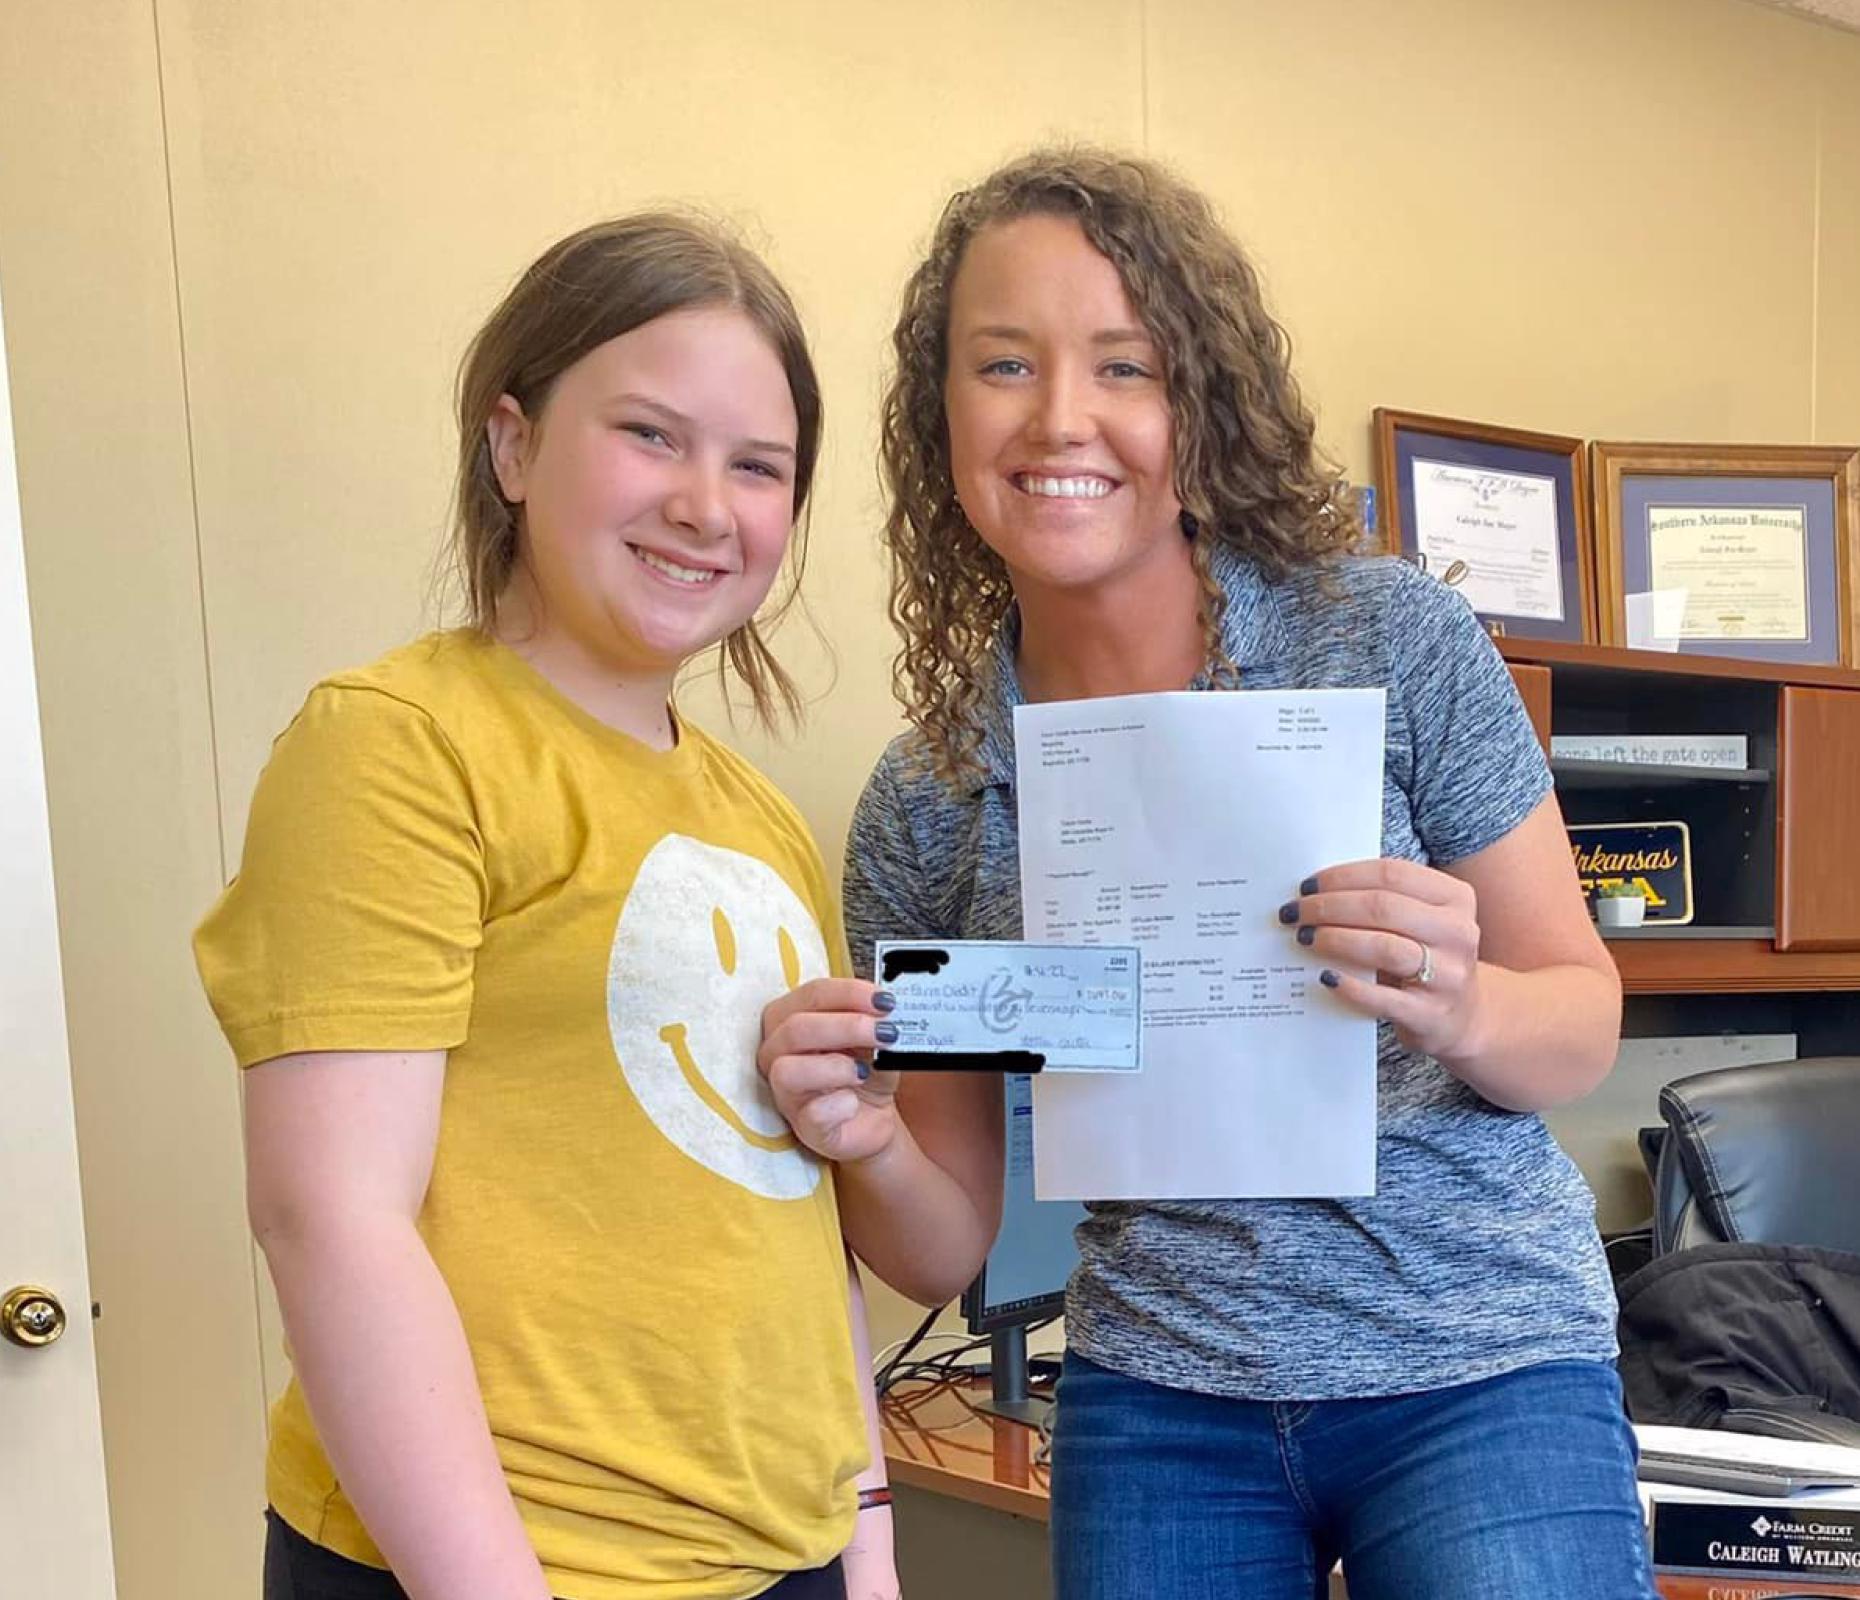 young girl in yellow shirt with happy face on it smiles as Loan Officer Caleigh Watlington shows her paid off youth loan paperwork.